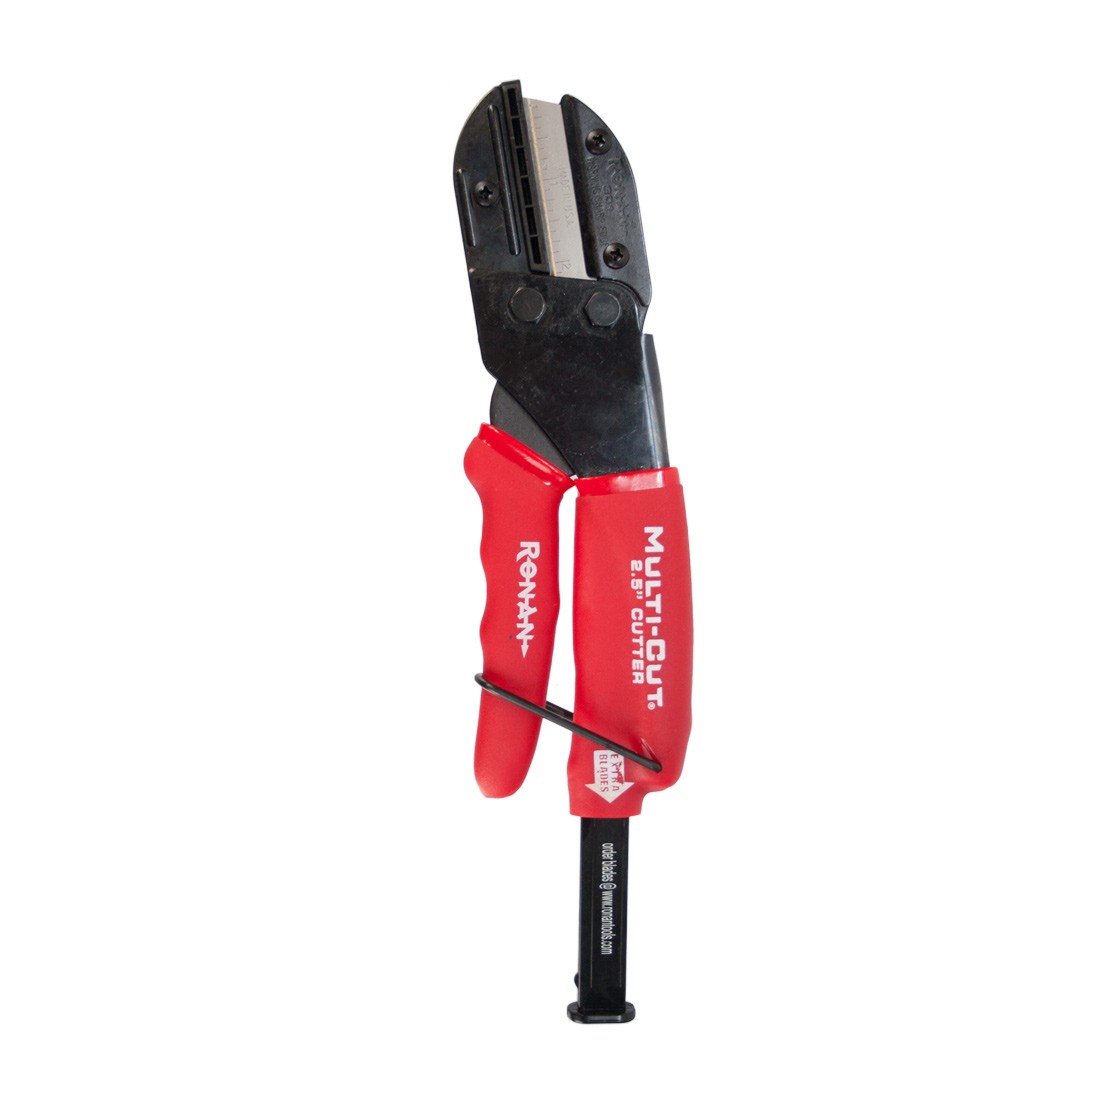 Ronan Multi-Cut Rubber Cutter - Upright Extended Extra Blade View